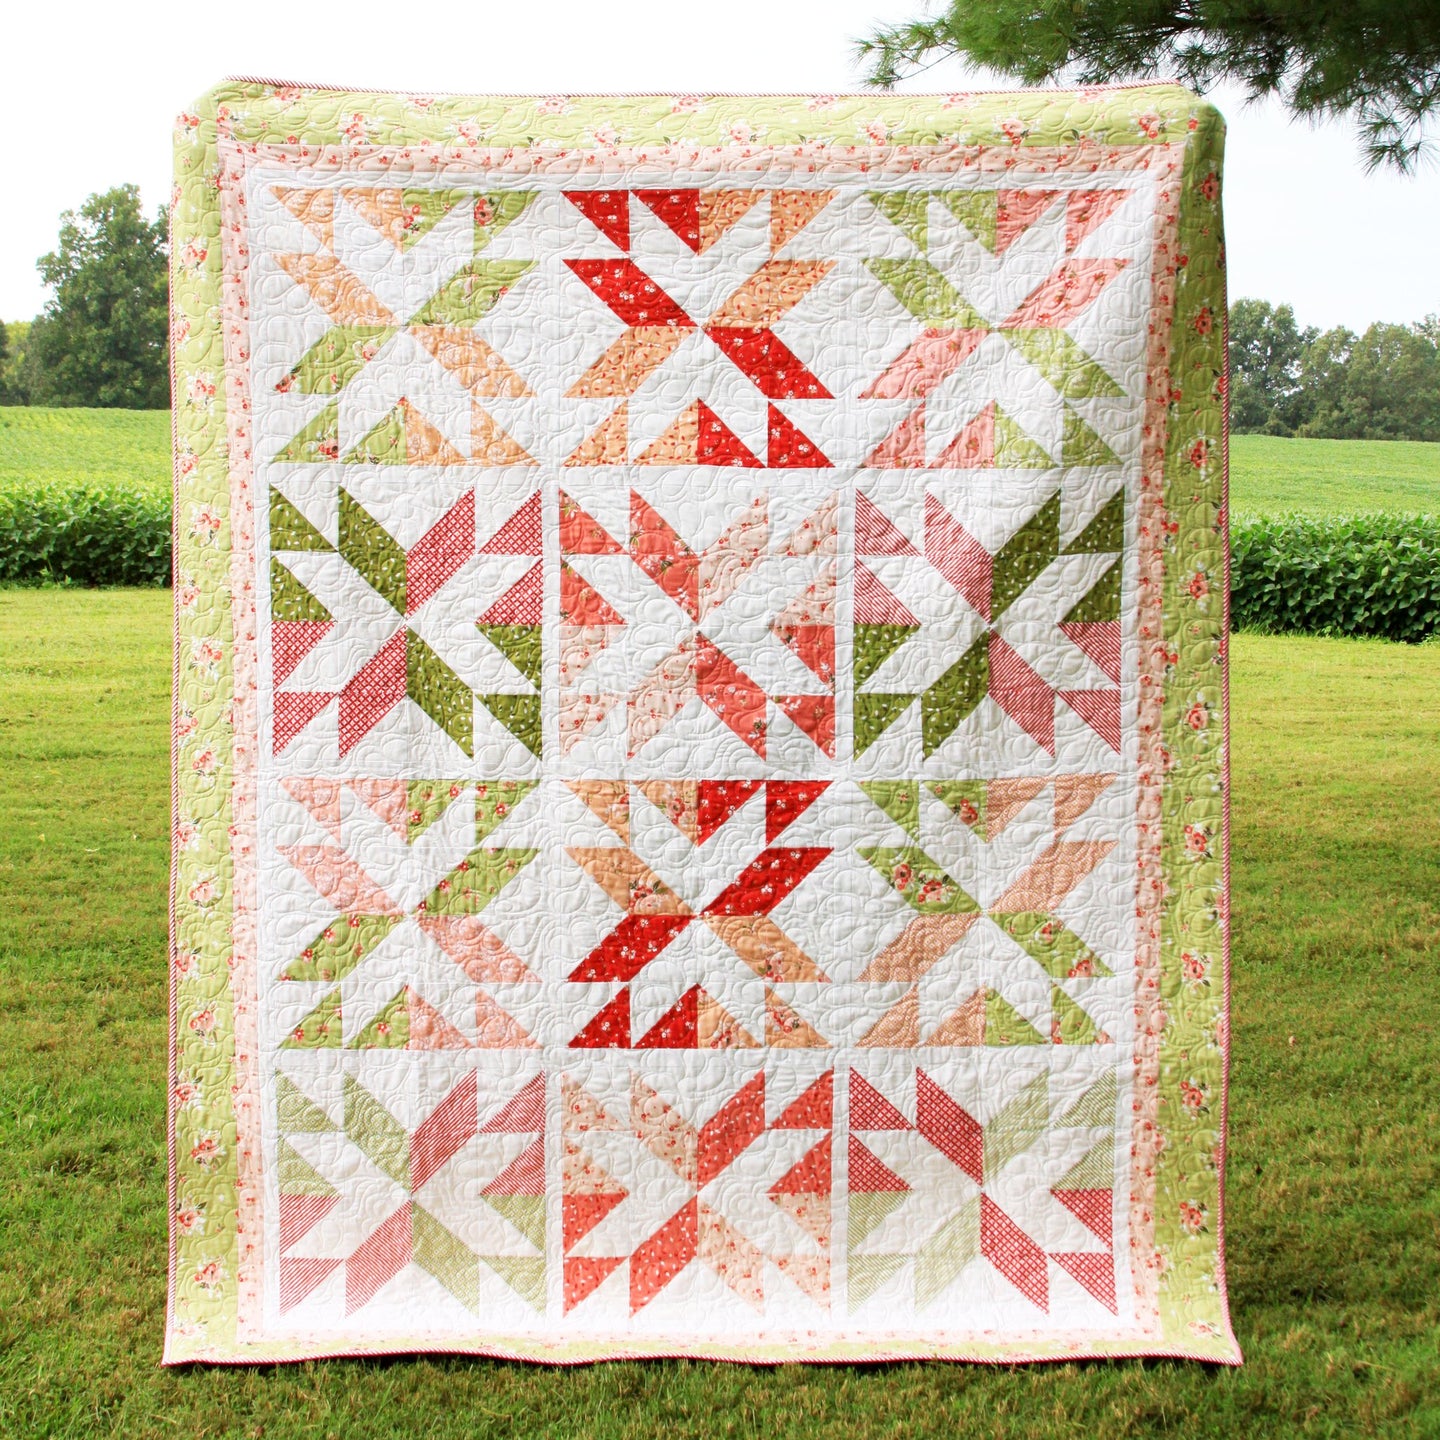 PATTERN, STACKING STARS Quilt by Beverly McCullough of Flamingo Toes